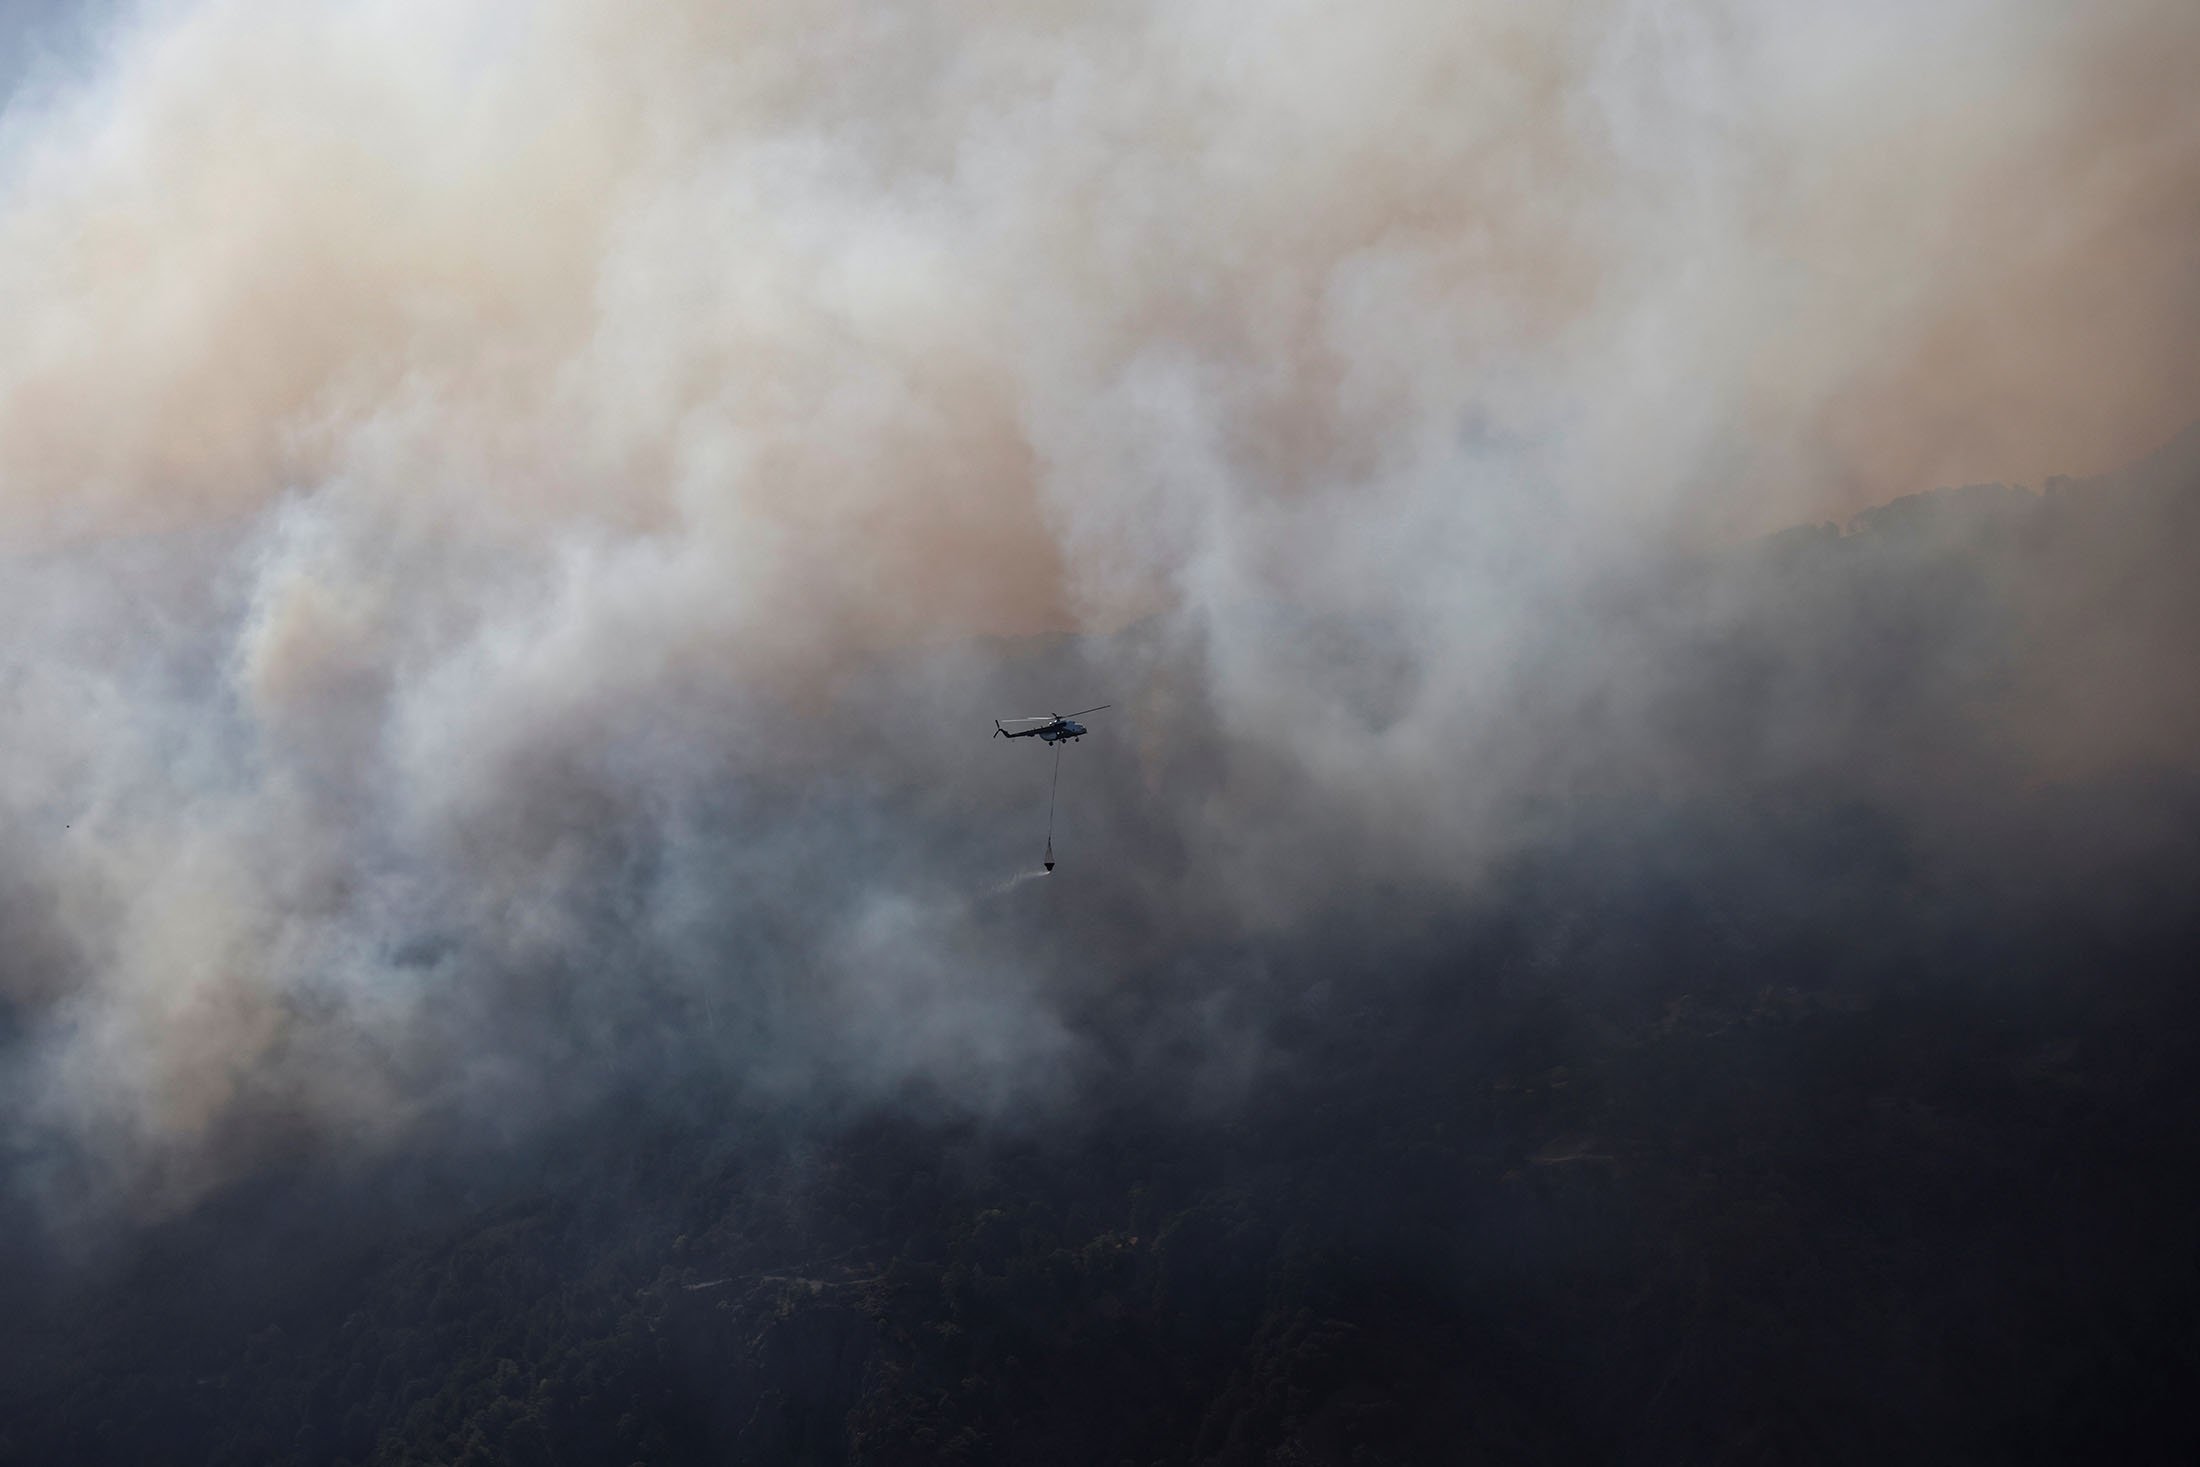 A firefighting helicopter carries water to drop during a wildfire near the Marmaris district of Muğla, Turkey, Aug. 3, 2021. (Reuters Photo)